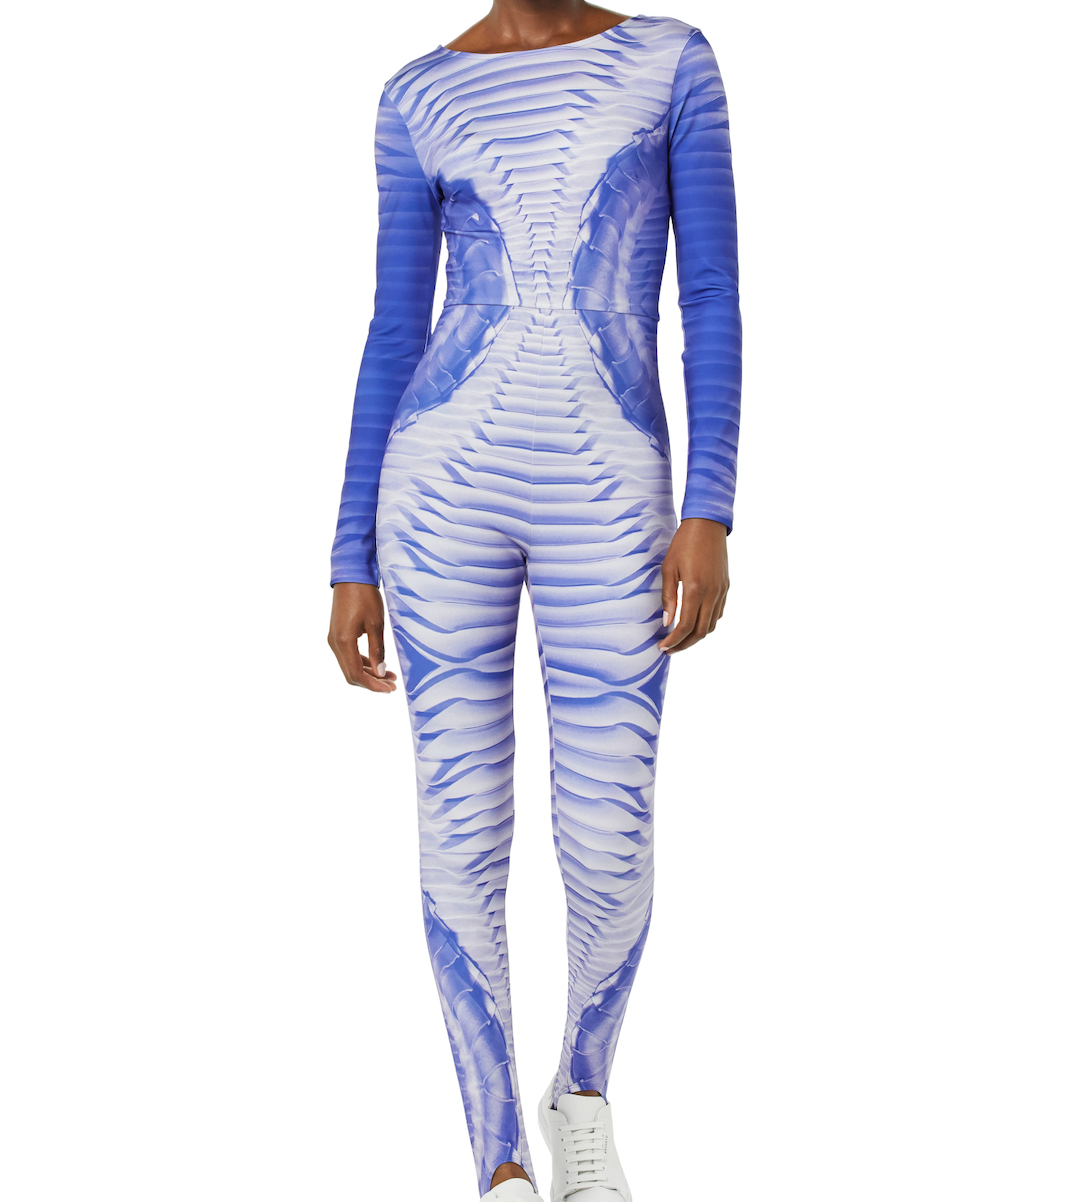 Printed Catsuit Inspired by Georgia's Winning Look